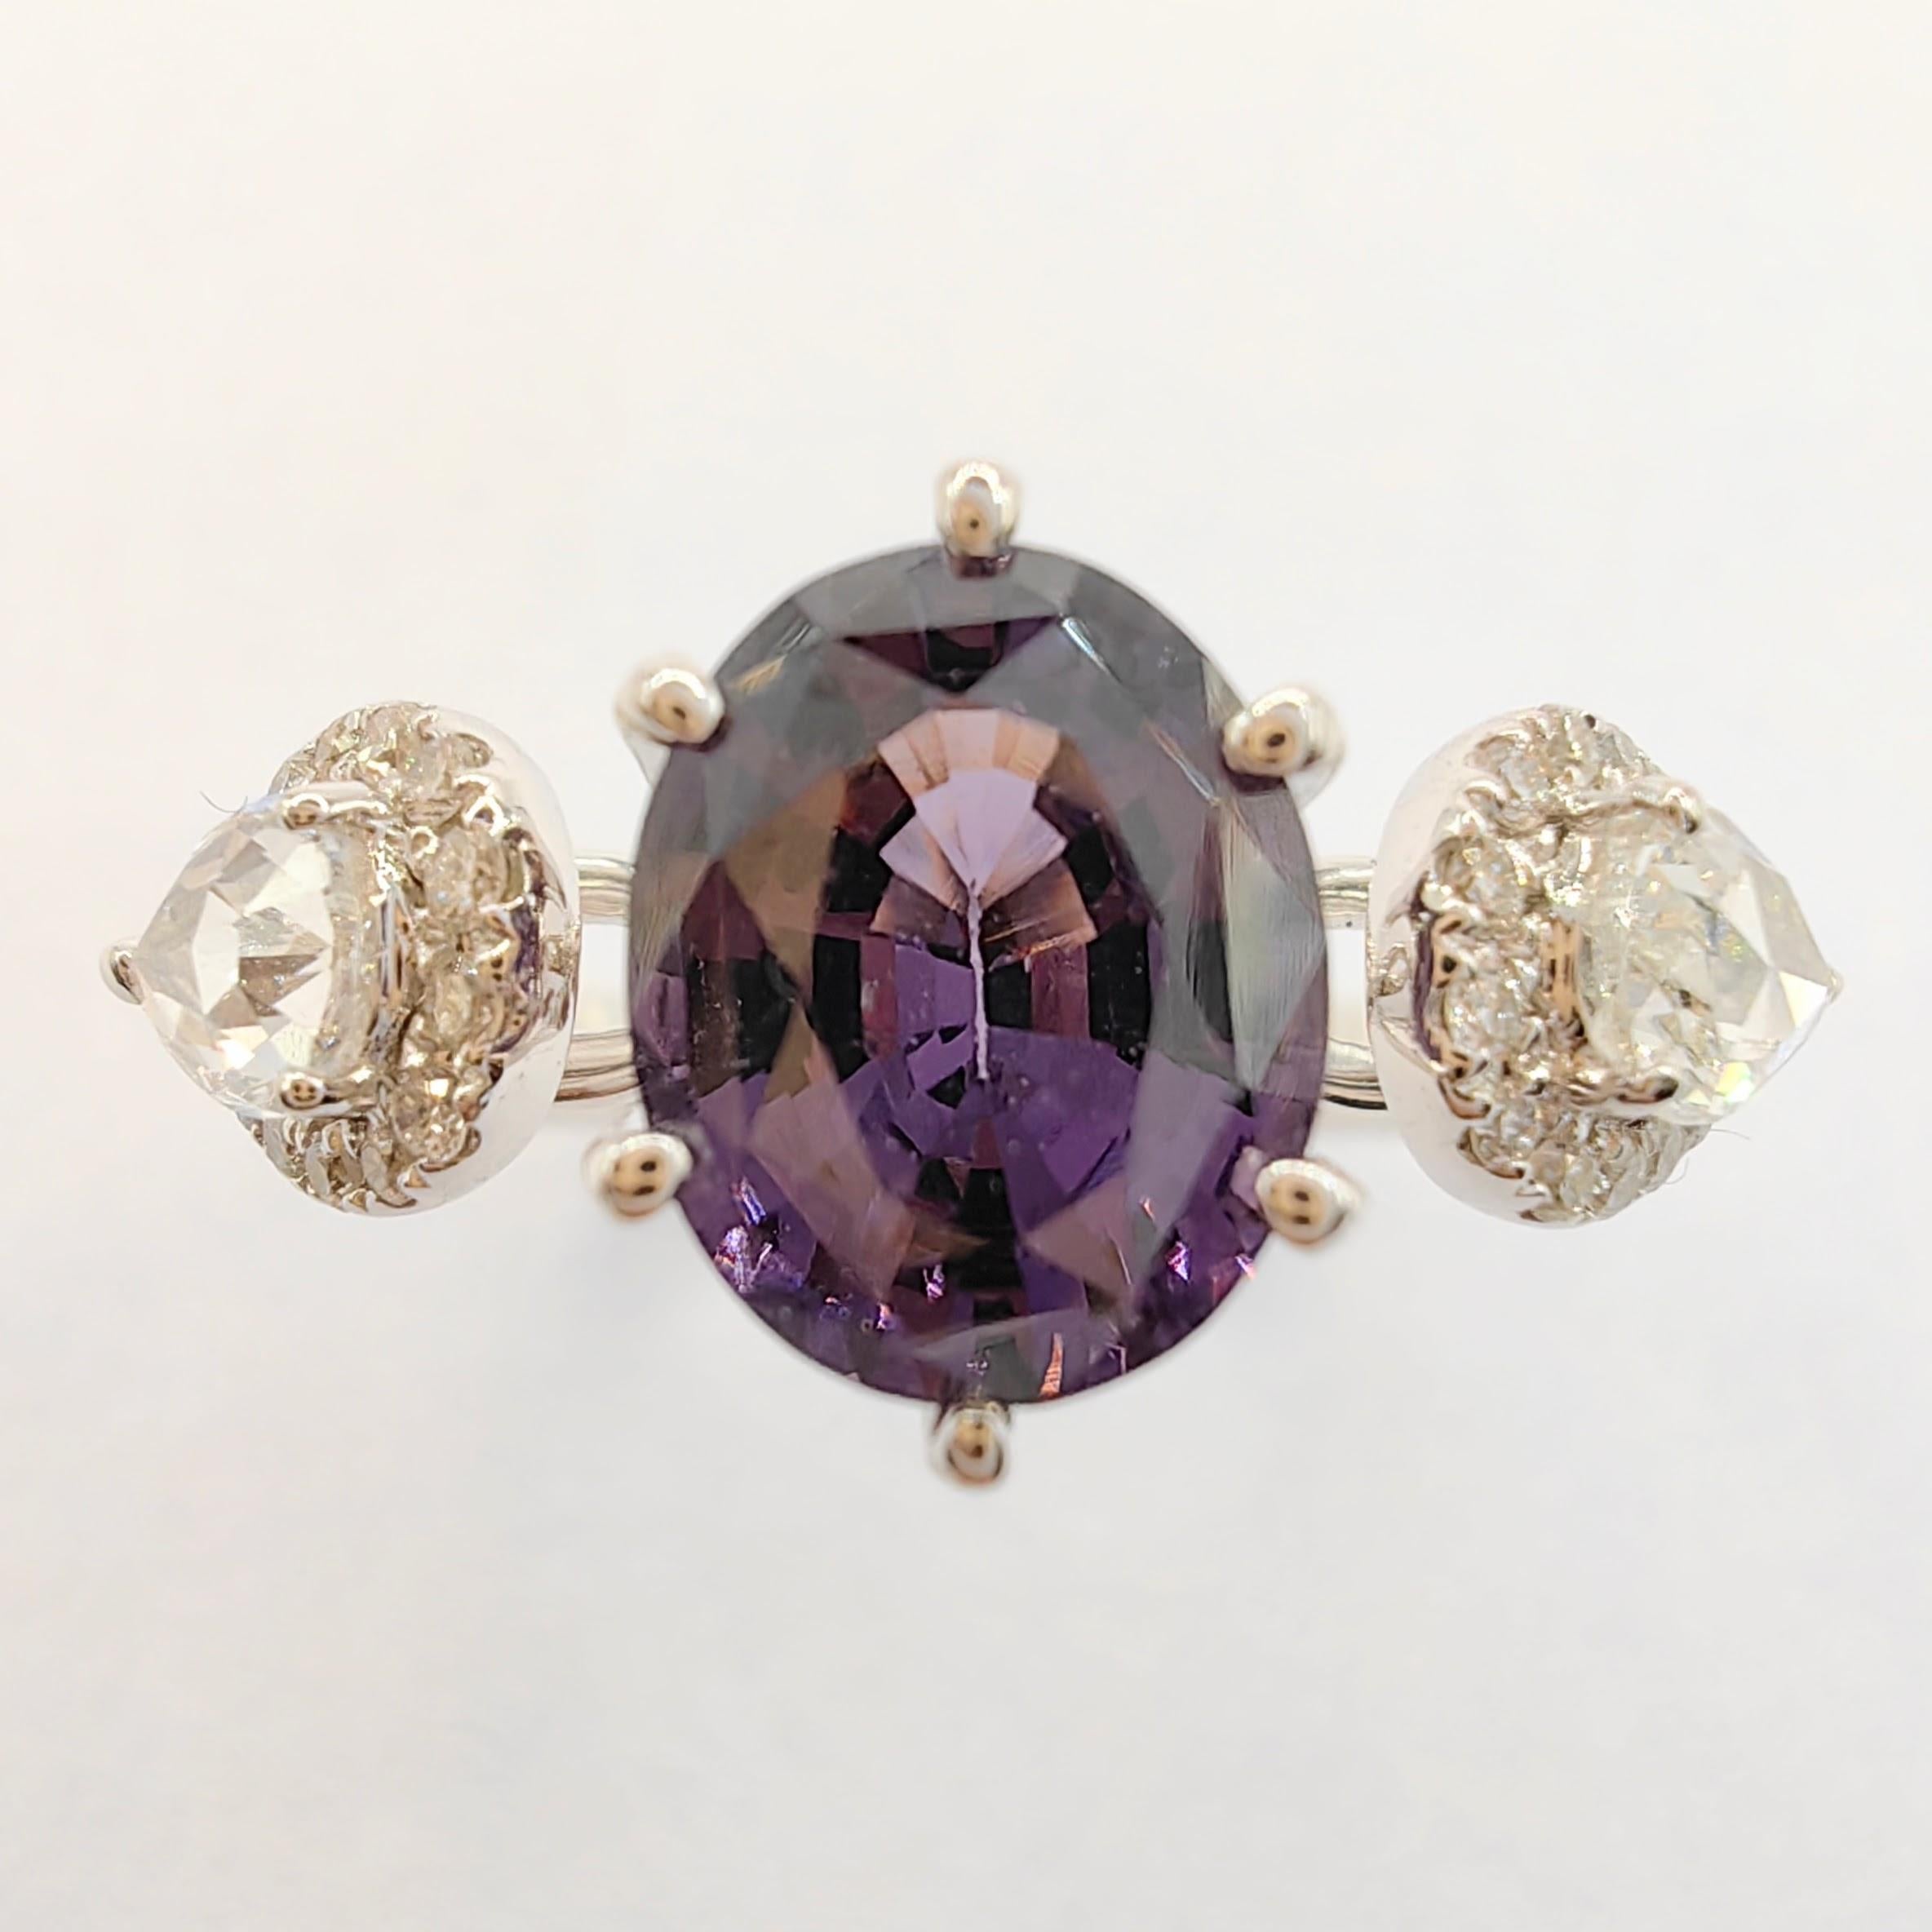 1.19 Carat Oval Cut Purple Spinel Rose Cut Halo Diamond Ring in 18K White Gold In New Condition For Sale In Wan Chai District, HK